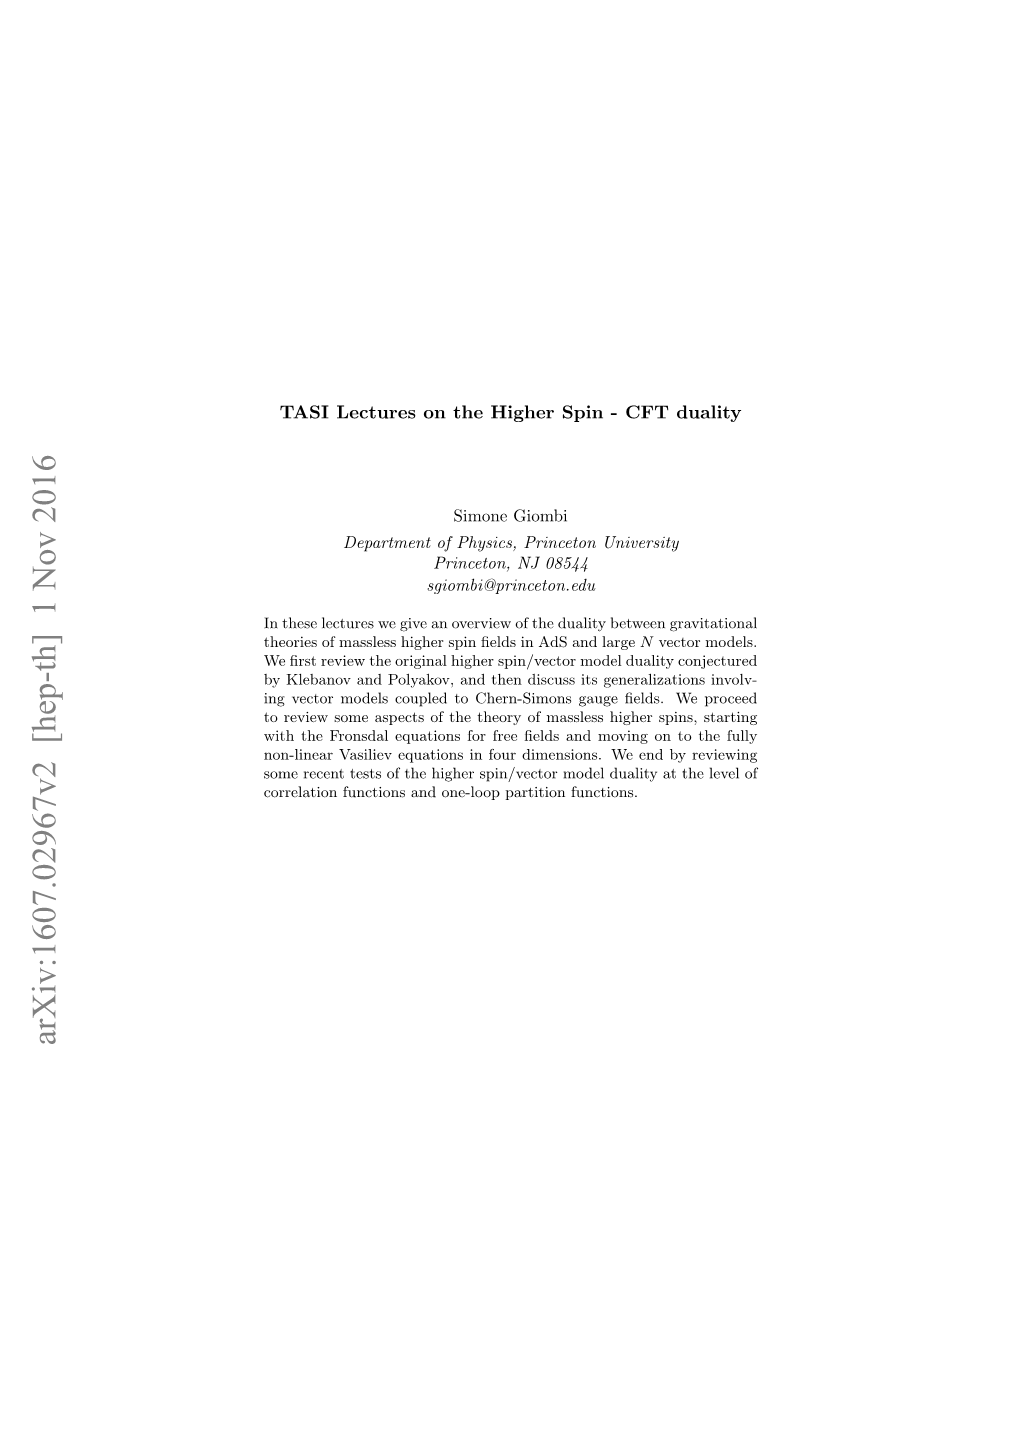 TASI Lectures on the Higher Spin-CFT Duality